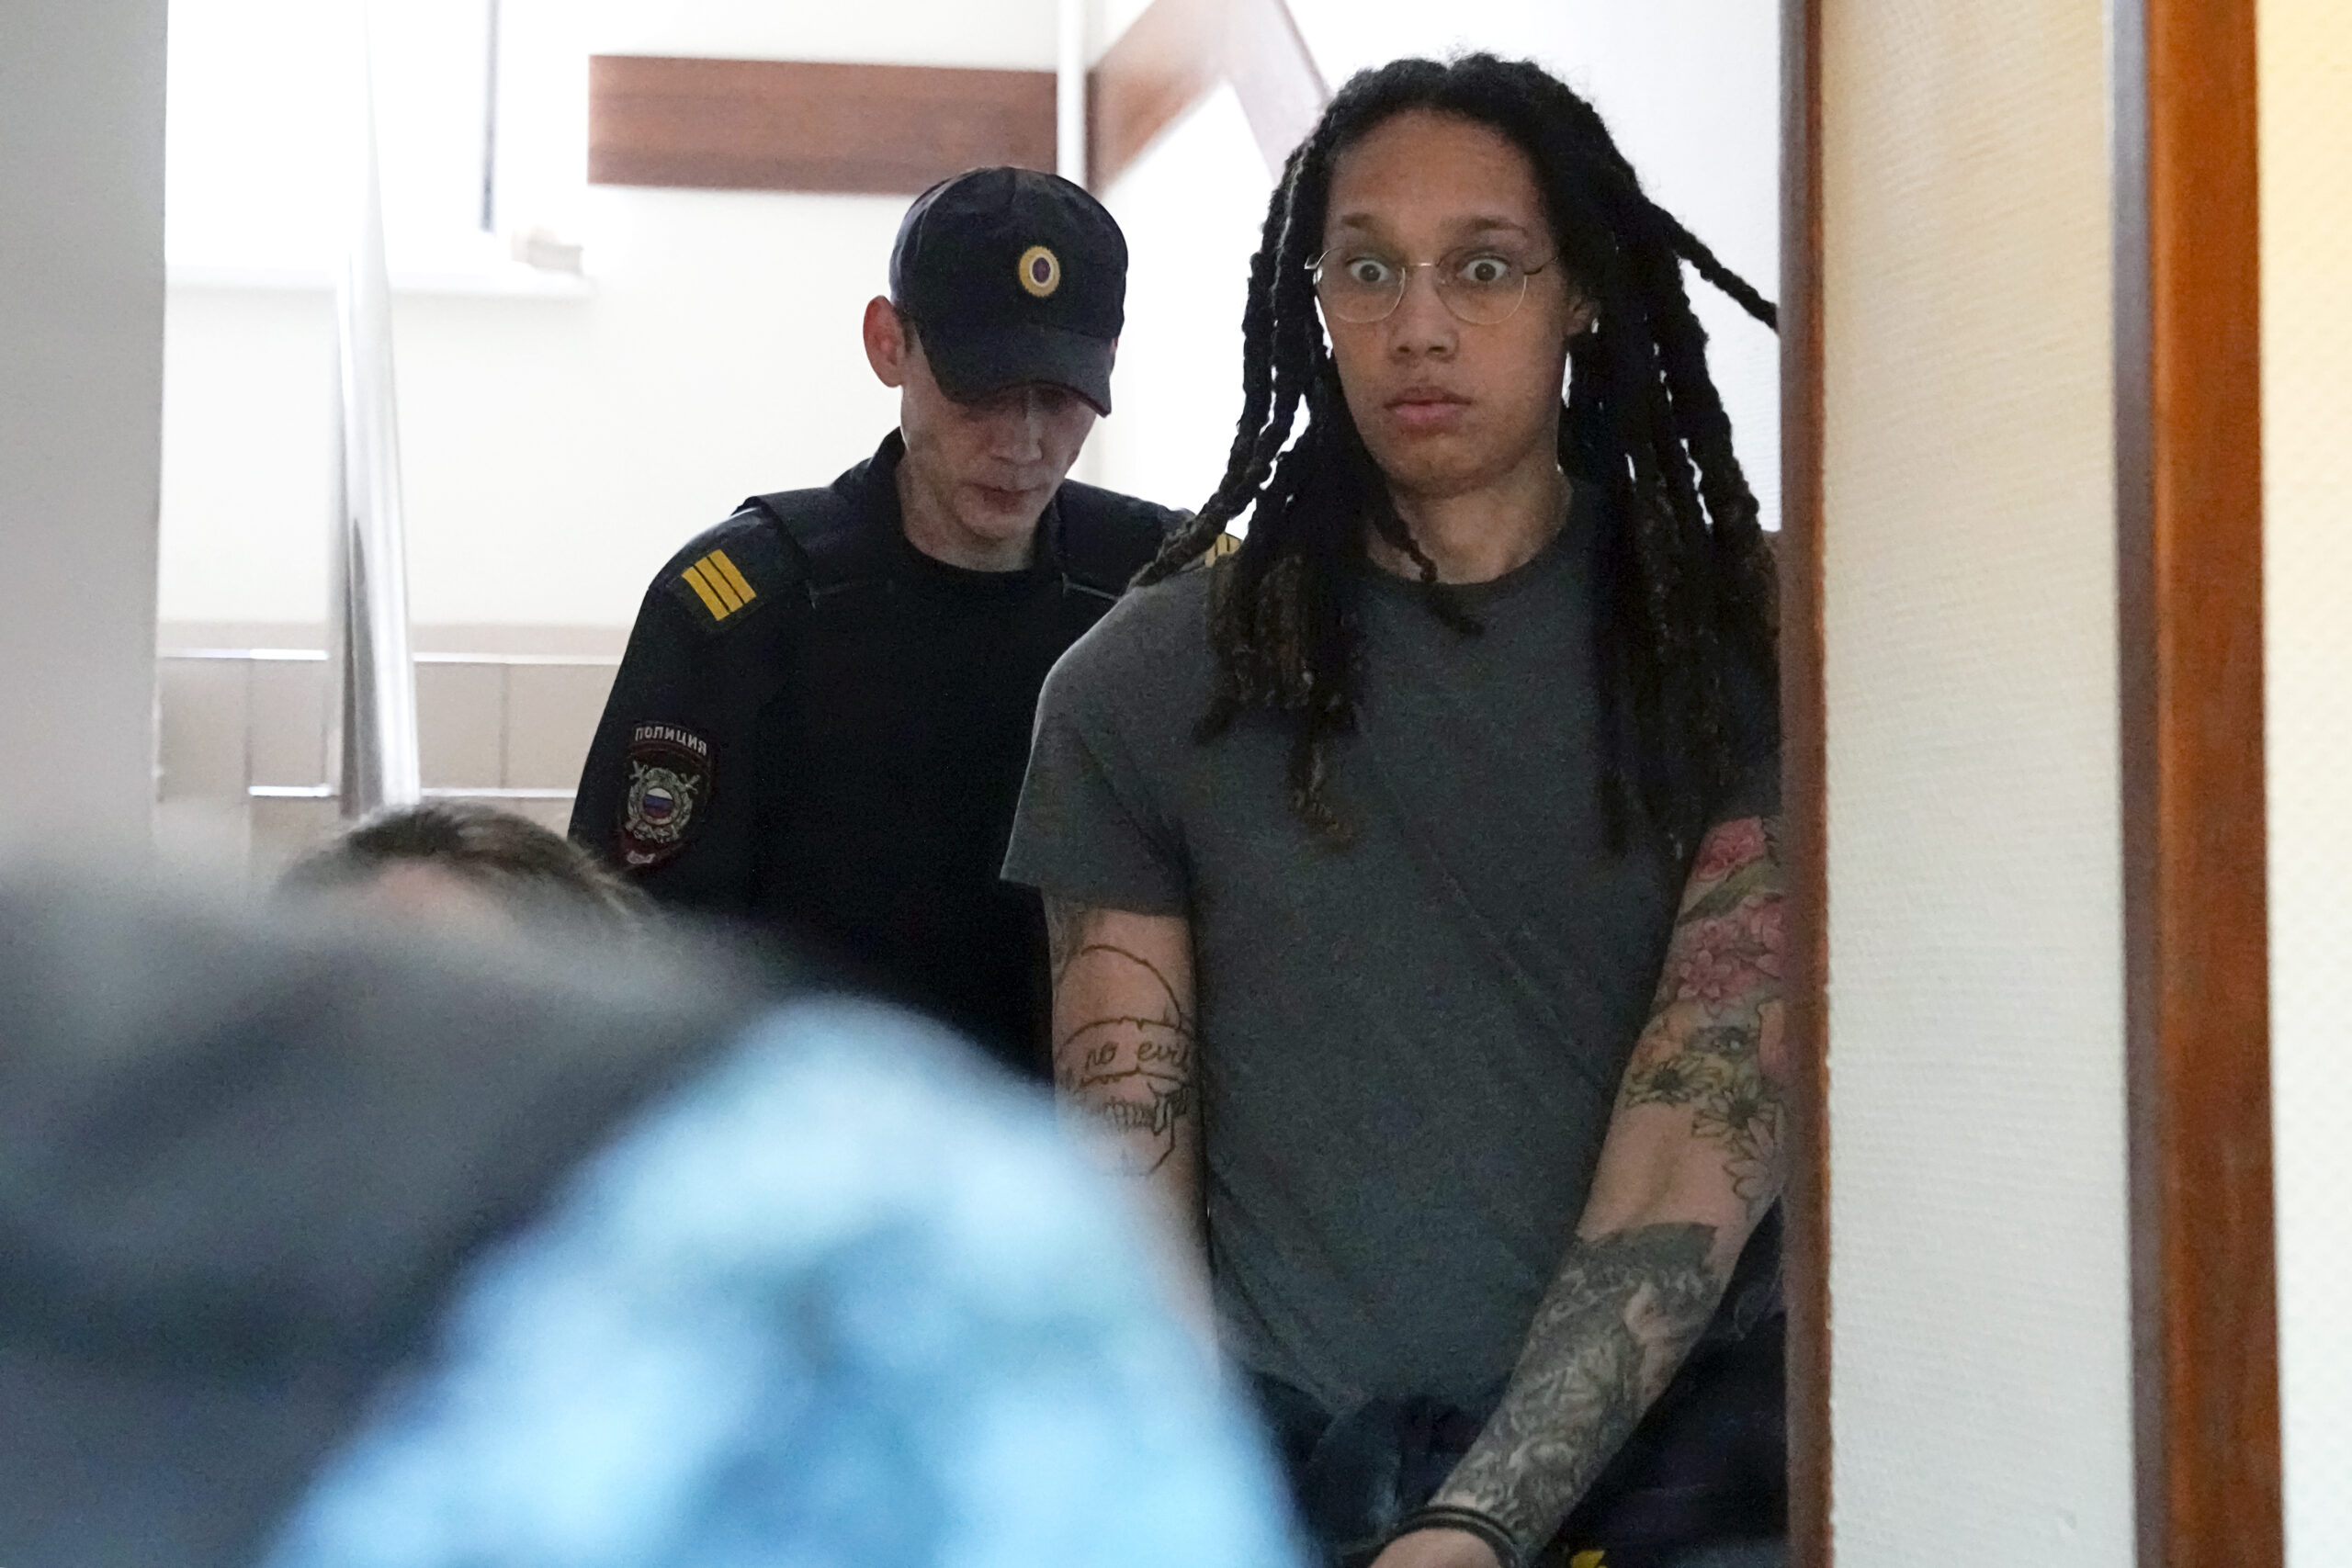 WNBA star and two-time Olympic gold medalist Brittney Griner is escorted to a courtroom for a hearing, in Khimki just outside Moscow, Russia, Monday, June 27, 2022. More than four months after she was arrested at a Moscow airport for cannabis possession, American basketball star Brittney Griner is to appear in court Monday for a preliminary hearing ahead of her trial. (AP Photo/Alexander Zemlianichenko)